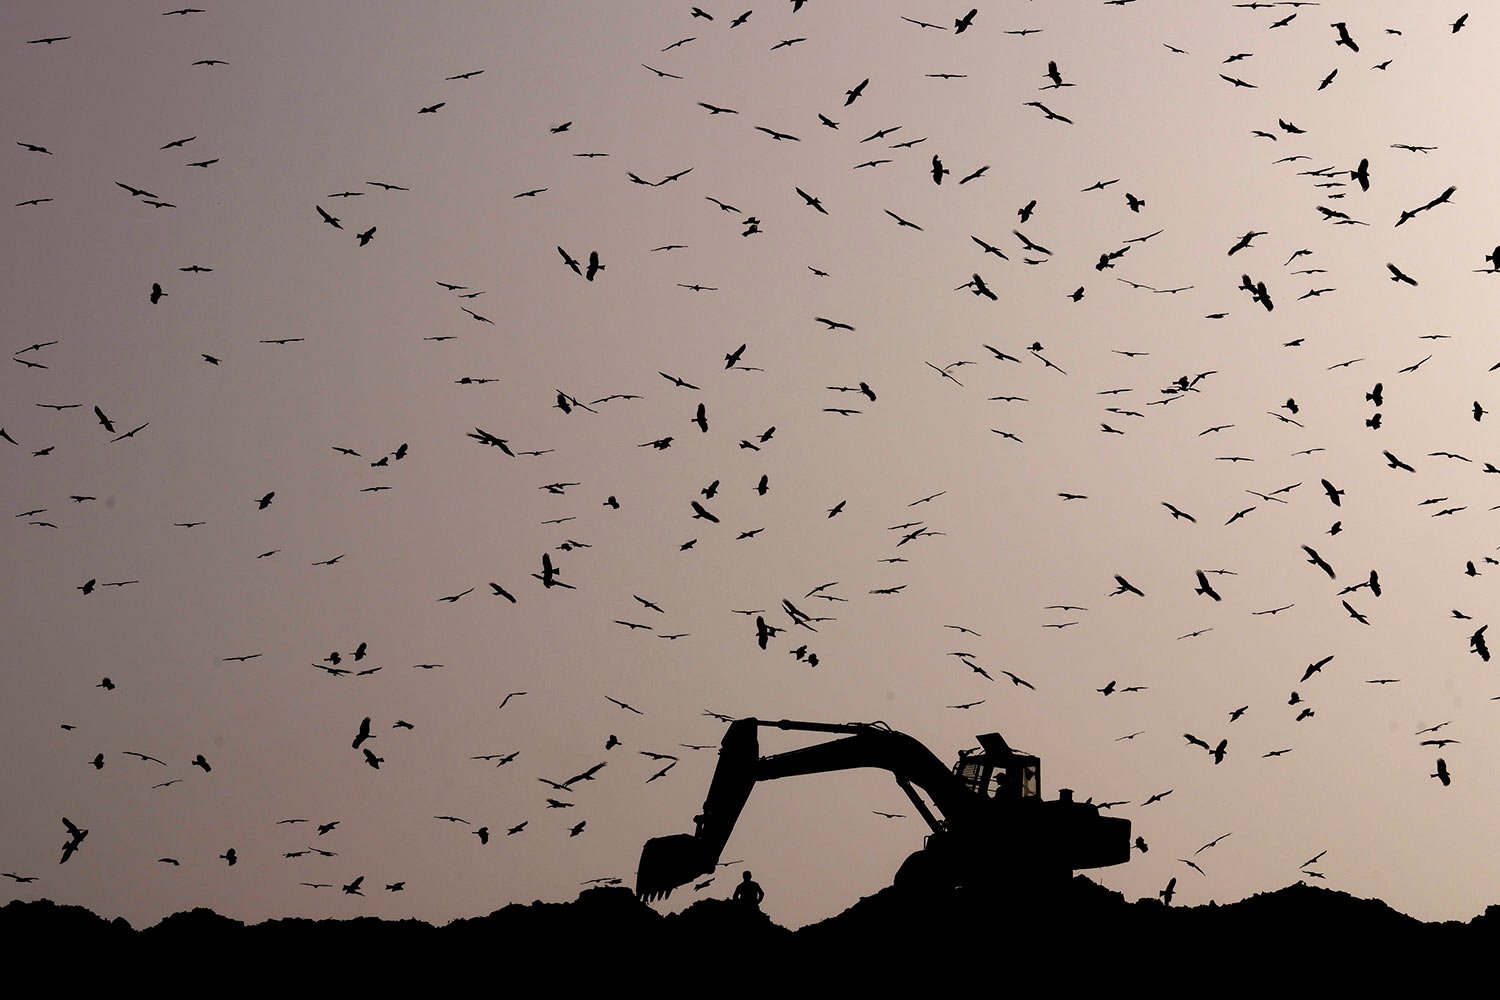  Birds fly around as an earthmover sorts garbage at the Ghazipur garbage dump in New Delhi, India, Monday, March 28, 2022. (AP Photo/Manish Swarup) 